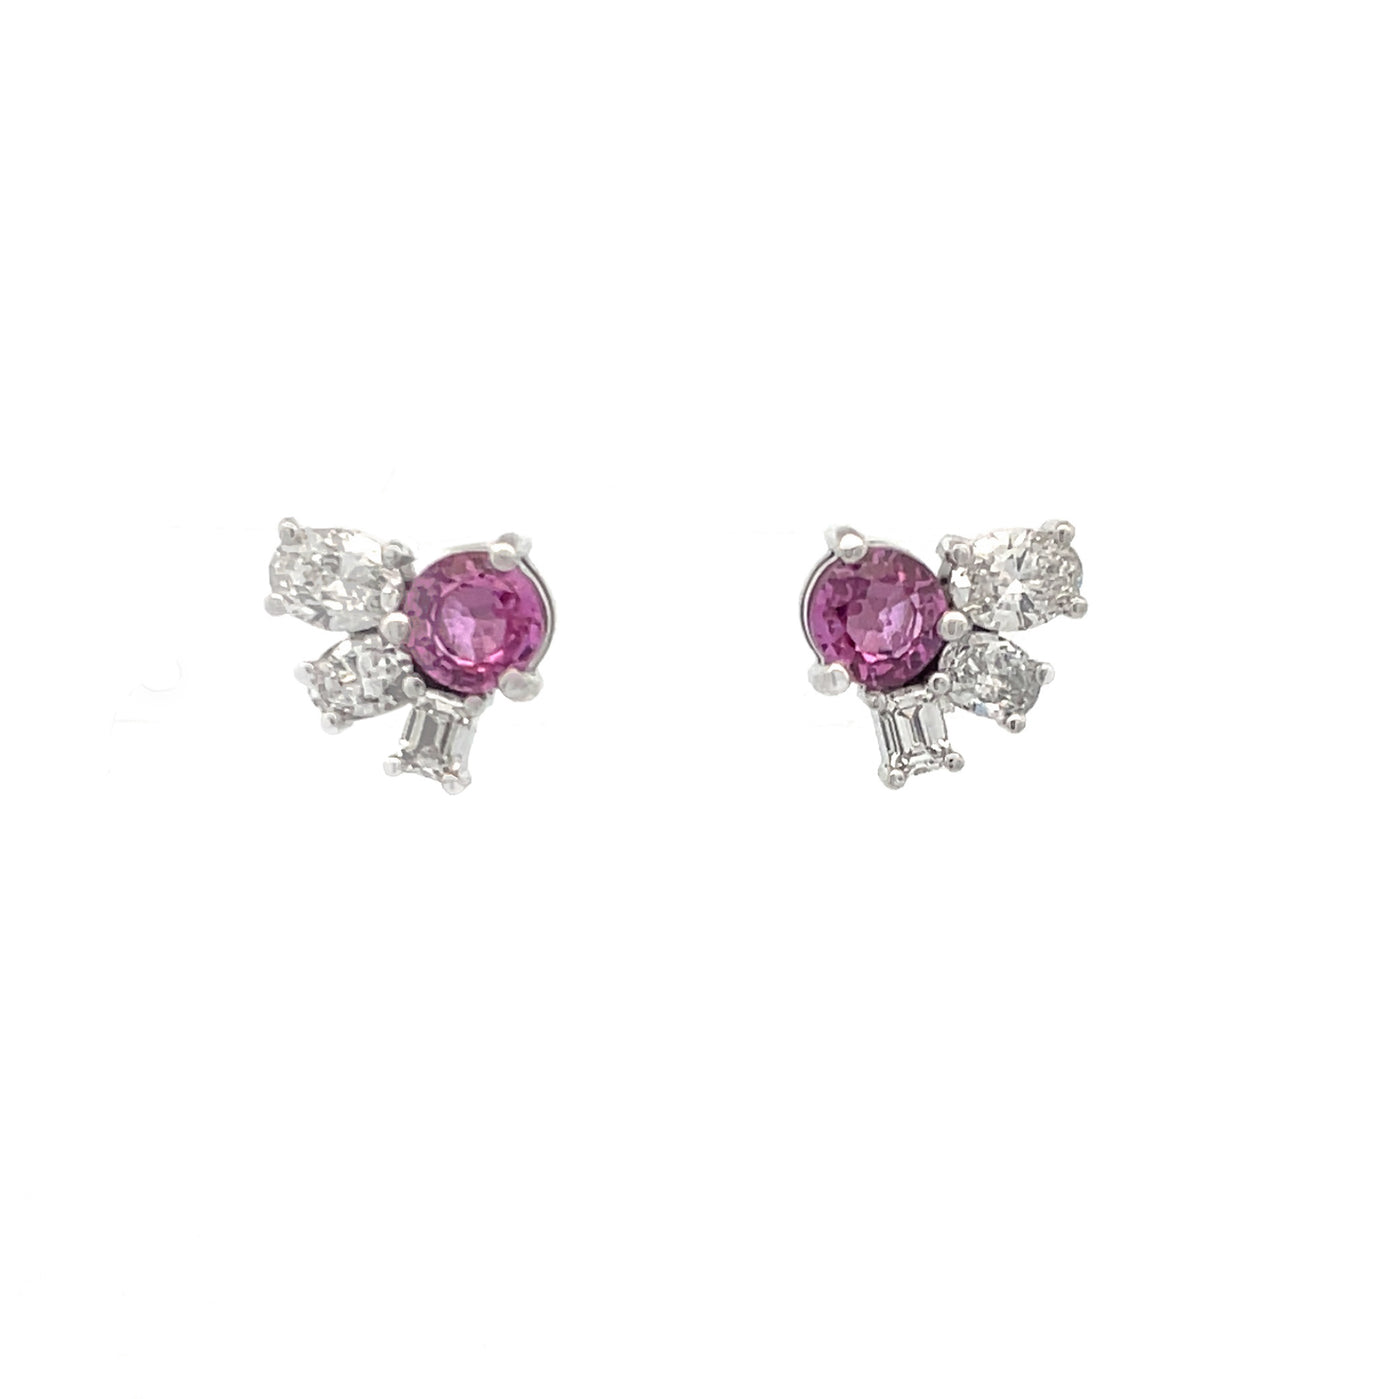 Pink Sapphire and Diamond Stud Earrings in White Gold